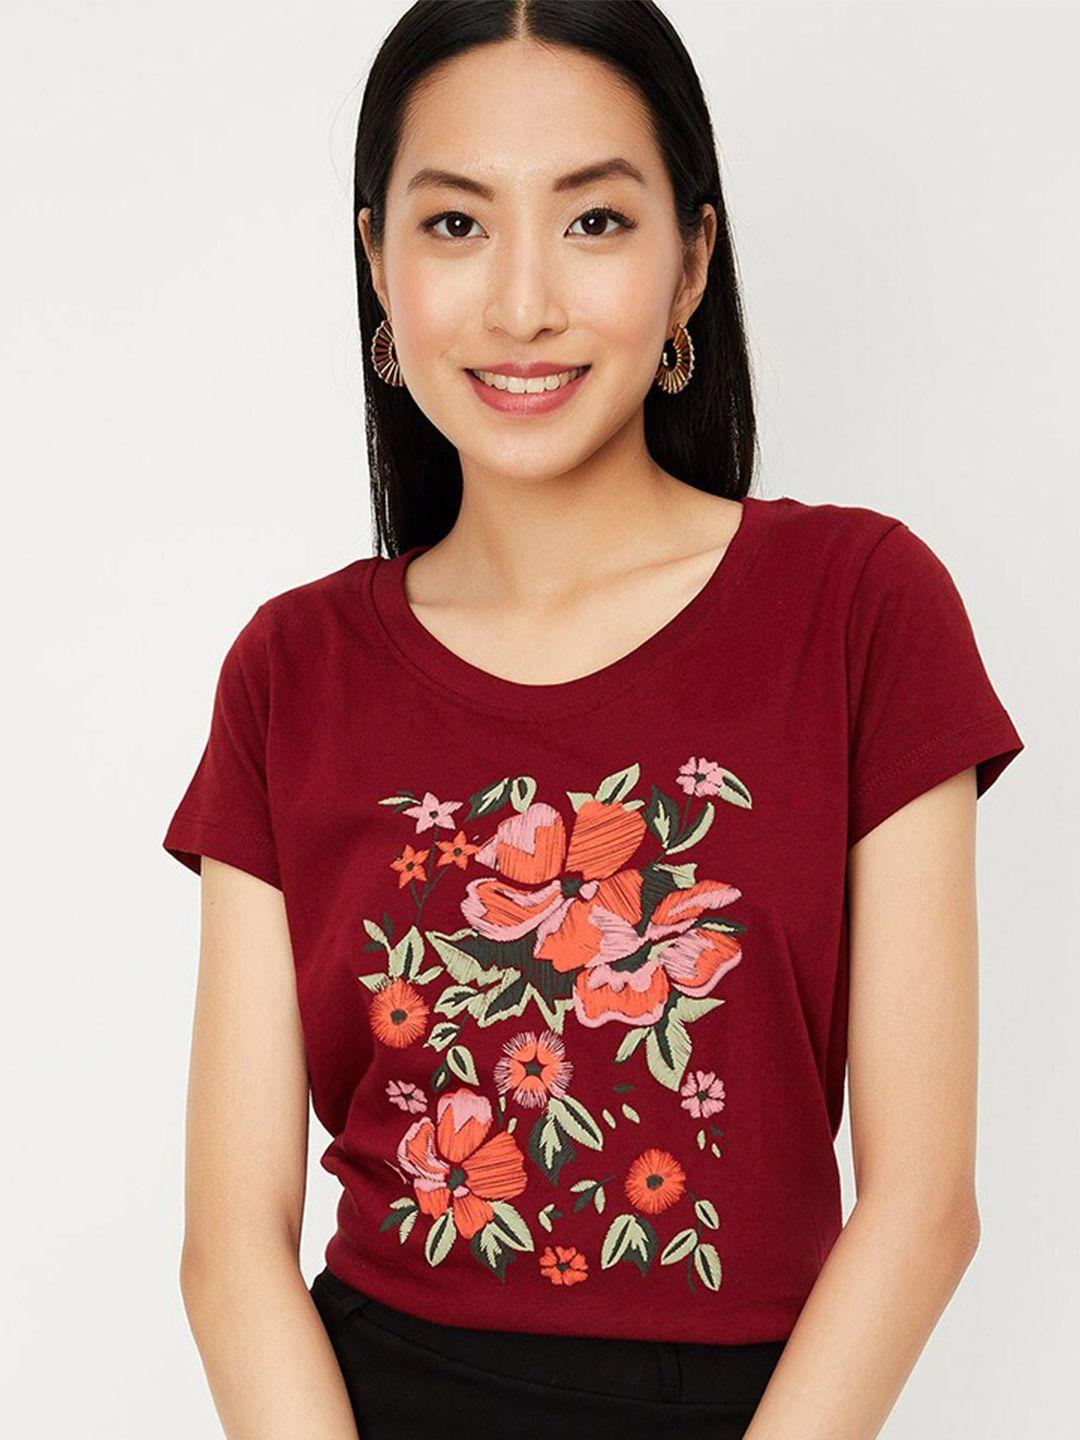 max graphic printed short sleeves pure cotton t-shirt